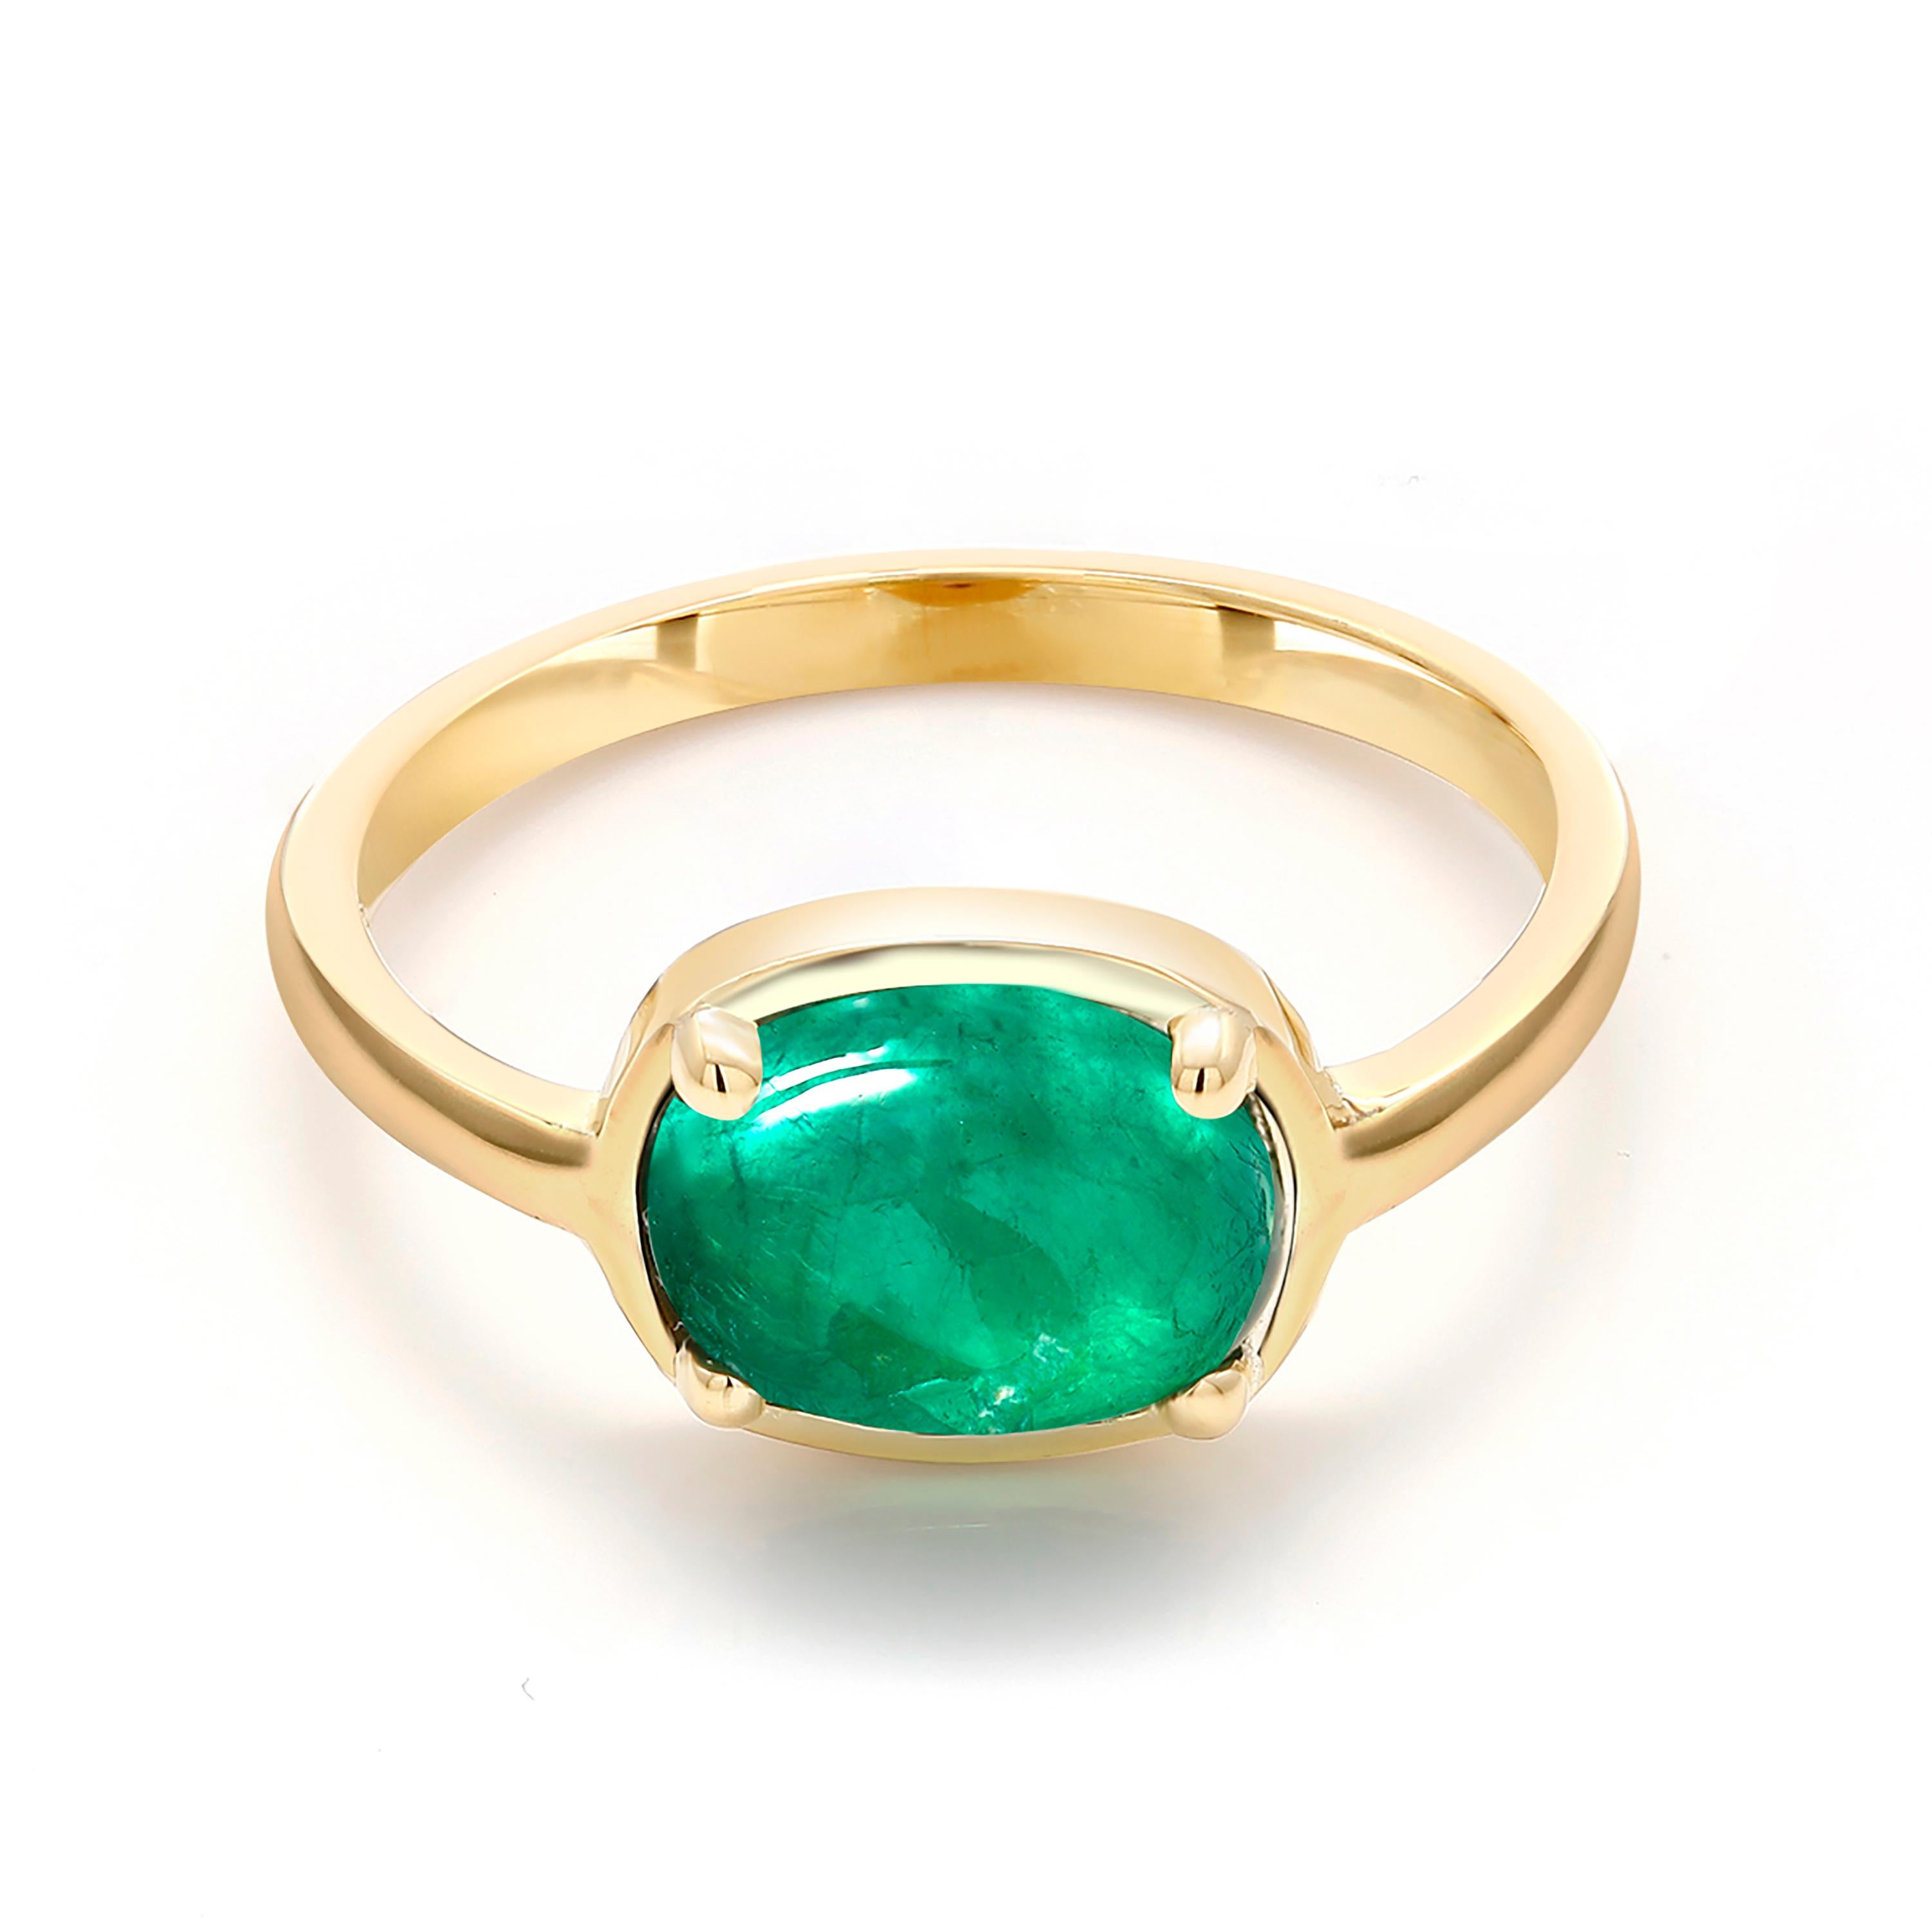 Modern Cabochon Emerald Gold Cocktail Ring Weighing 2.25 Carat